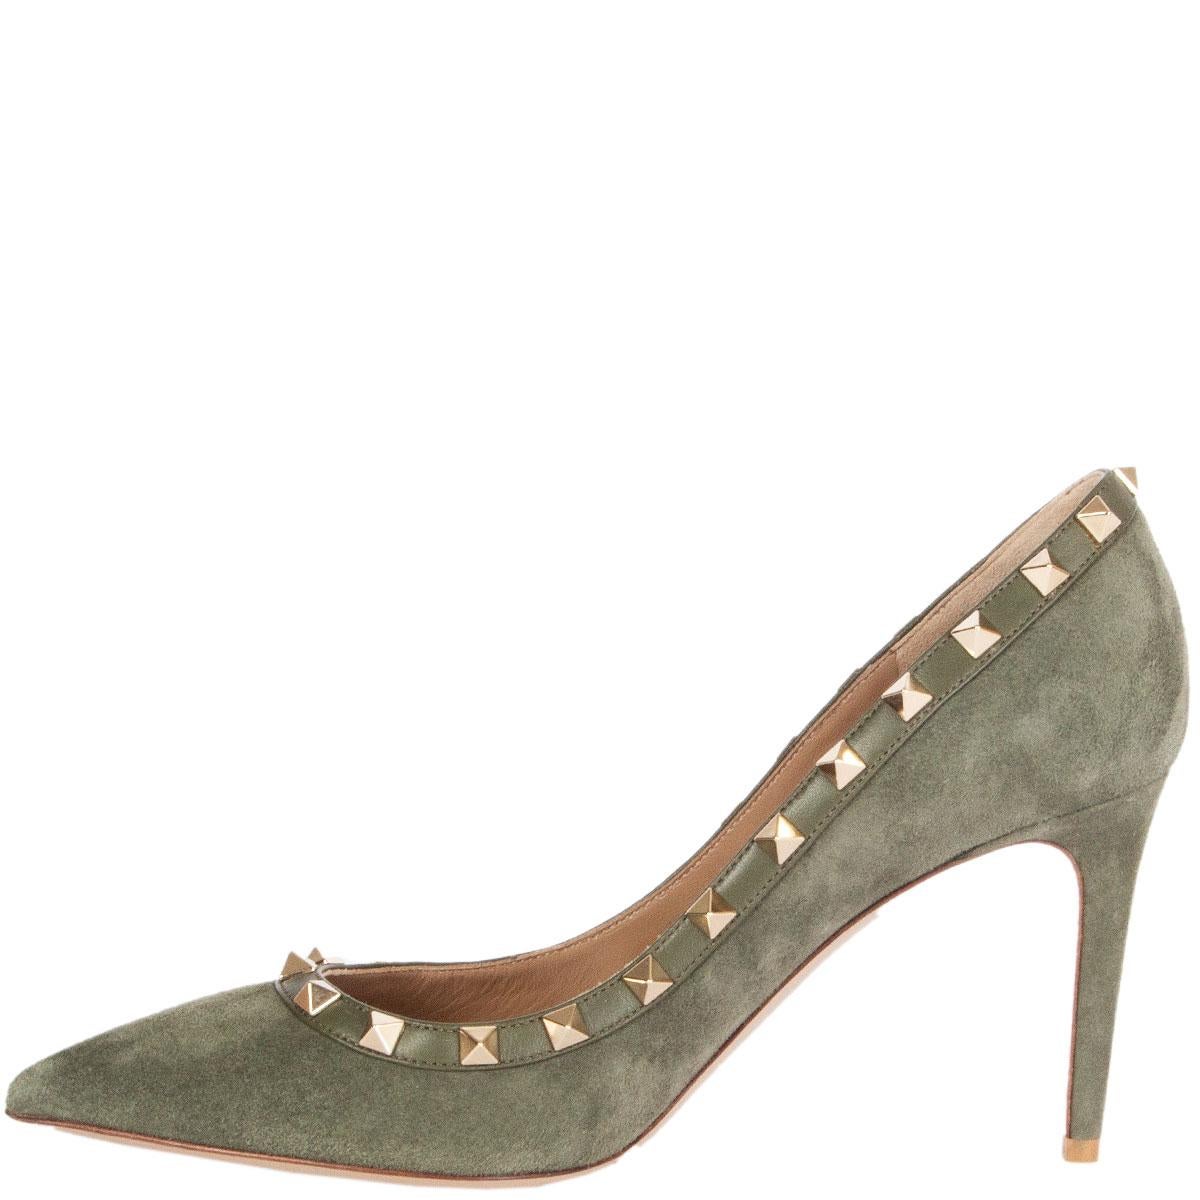 Brown VALENTINO green suede ROCKSTUD 85 POINTED-TOE Pumps Shoes 39